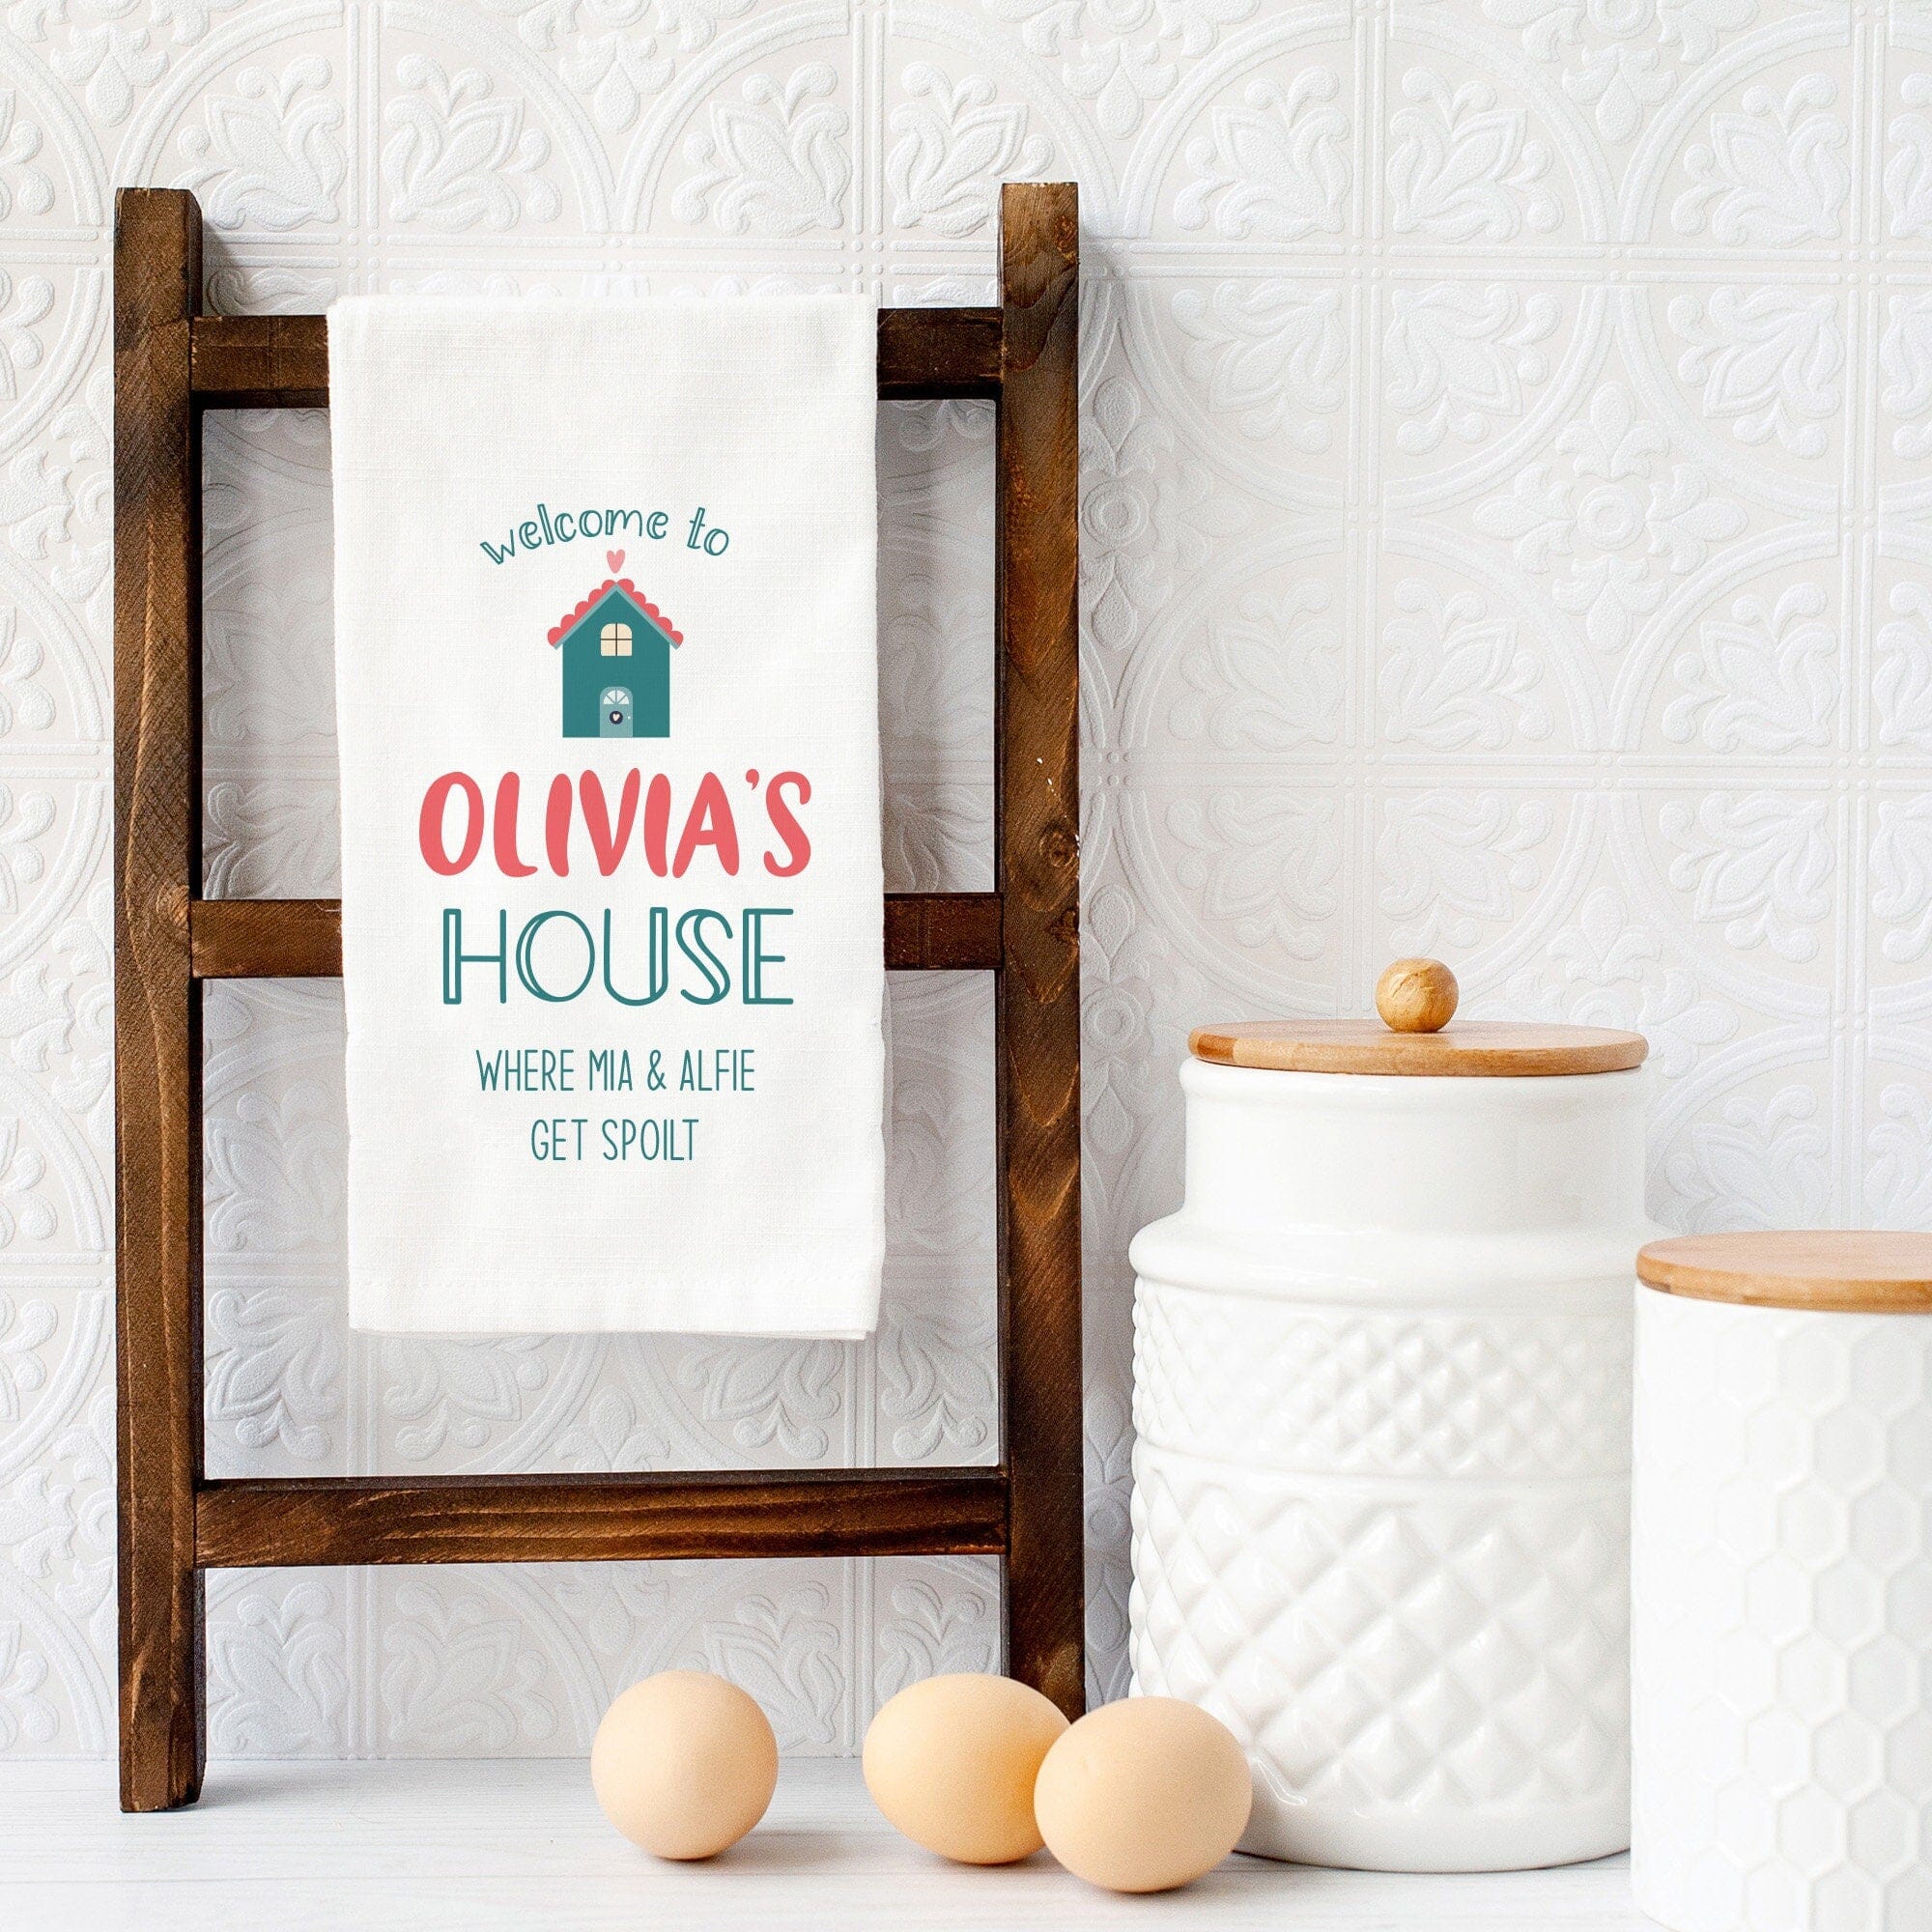 Personalised Nanny'S House Tea Towel With Grandchildren Names, Kitchen Housewarming